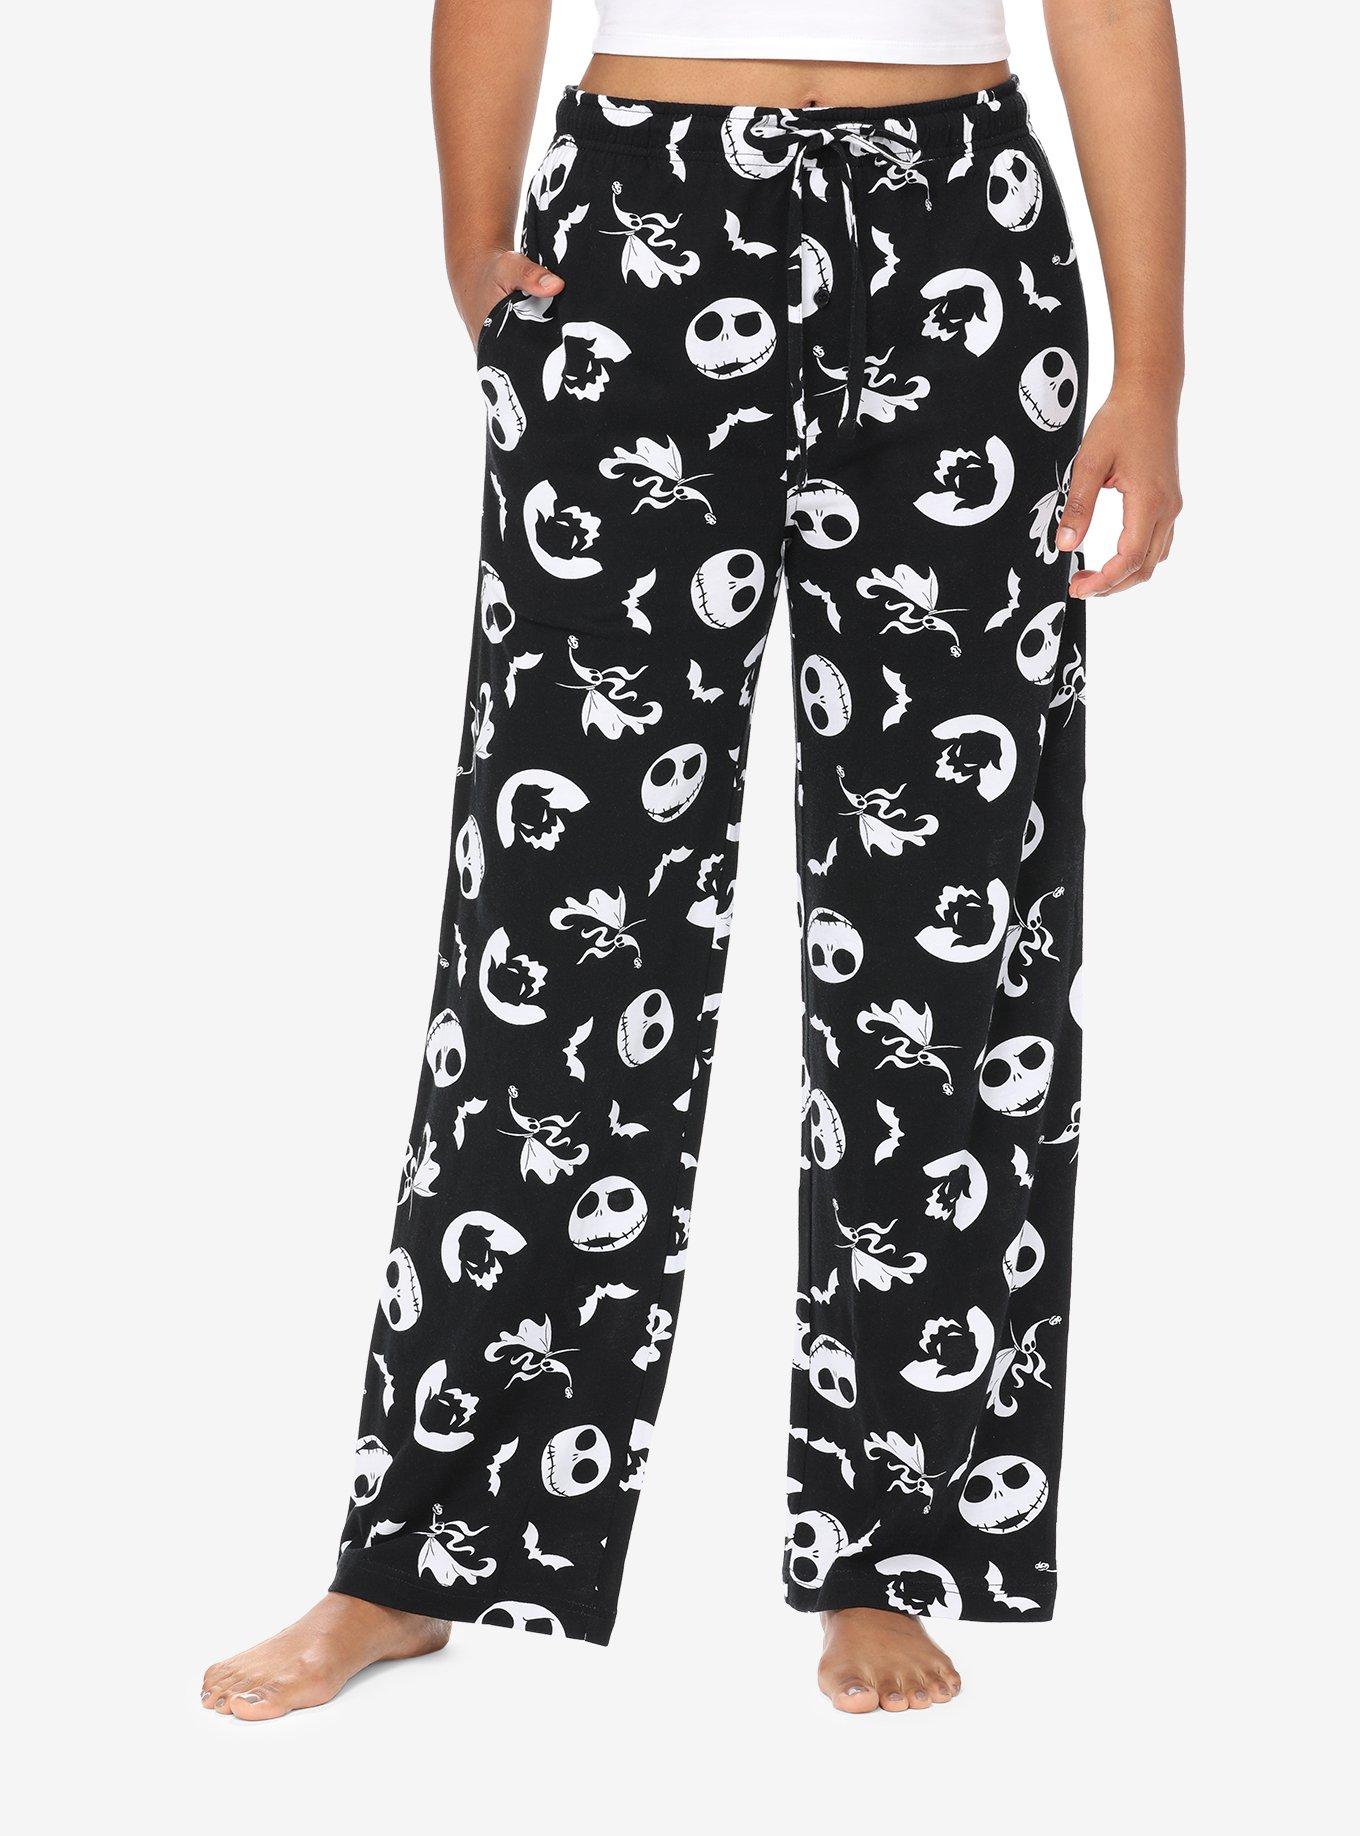 The Nightmare Before Christmas Characters Lounge Pants | Hot Topic